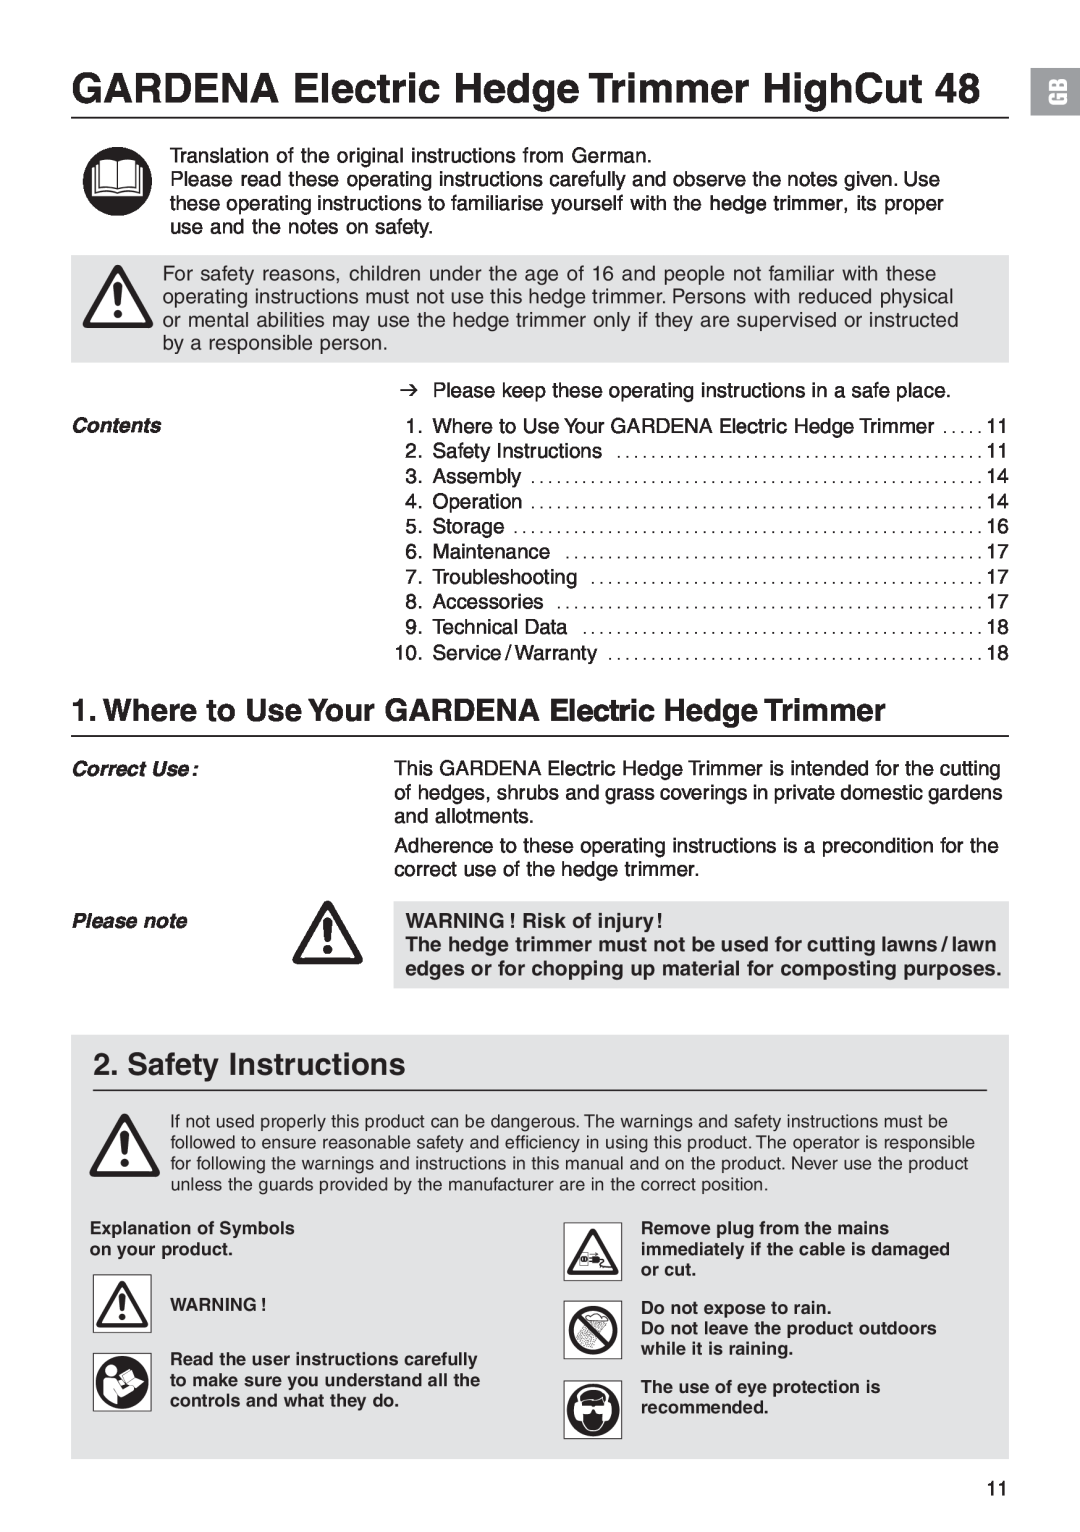 Gardena 48 Where to Use Your GARDENA Electric Hedge Trimmer, Safety Instructions, GARDENA Electric Hedge Trimmer HighCut 